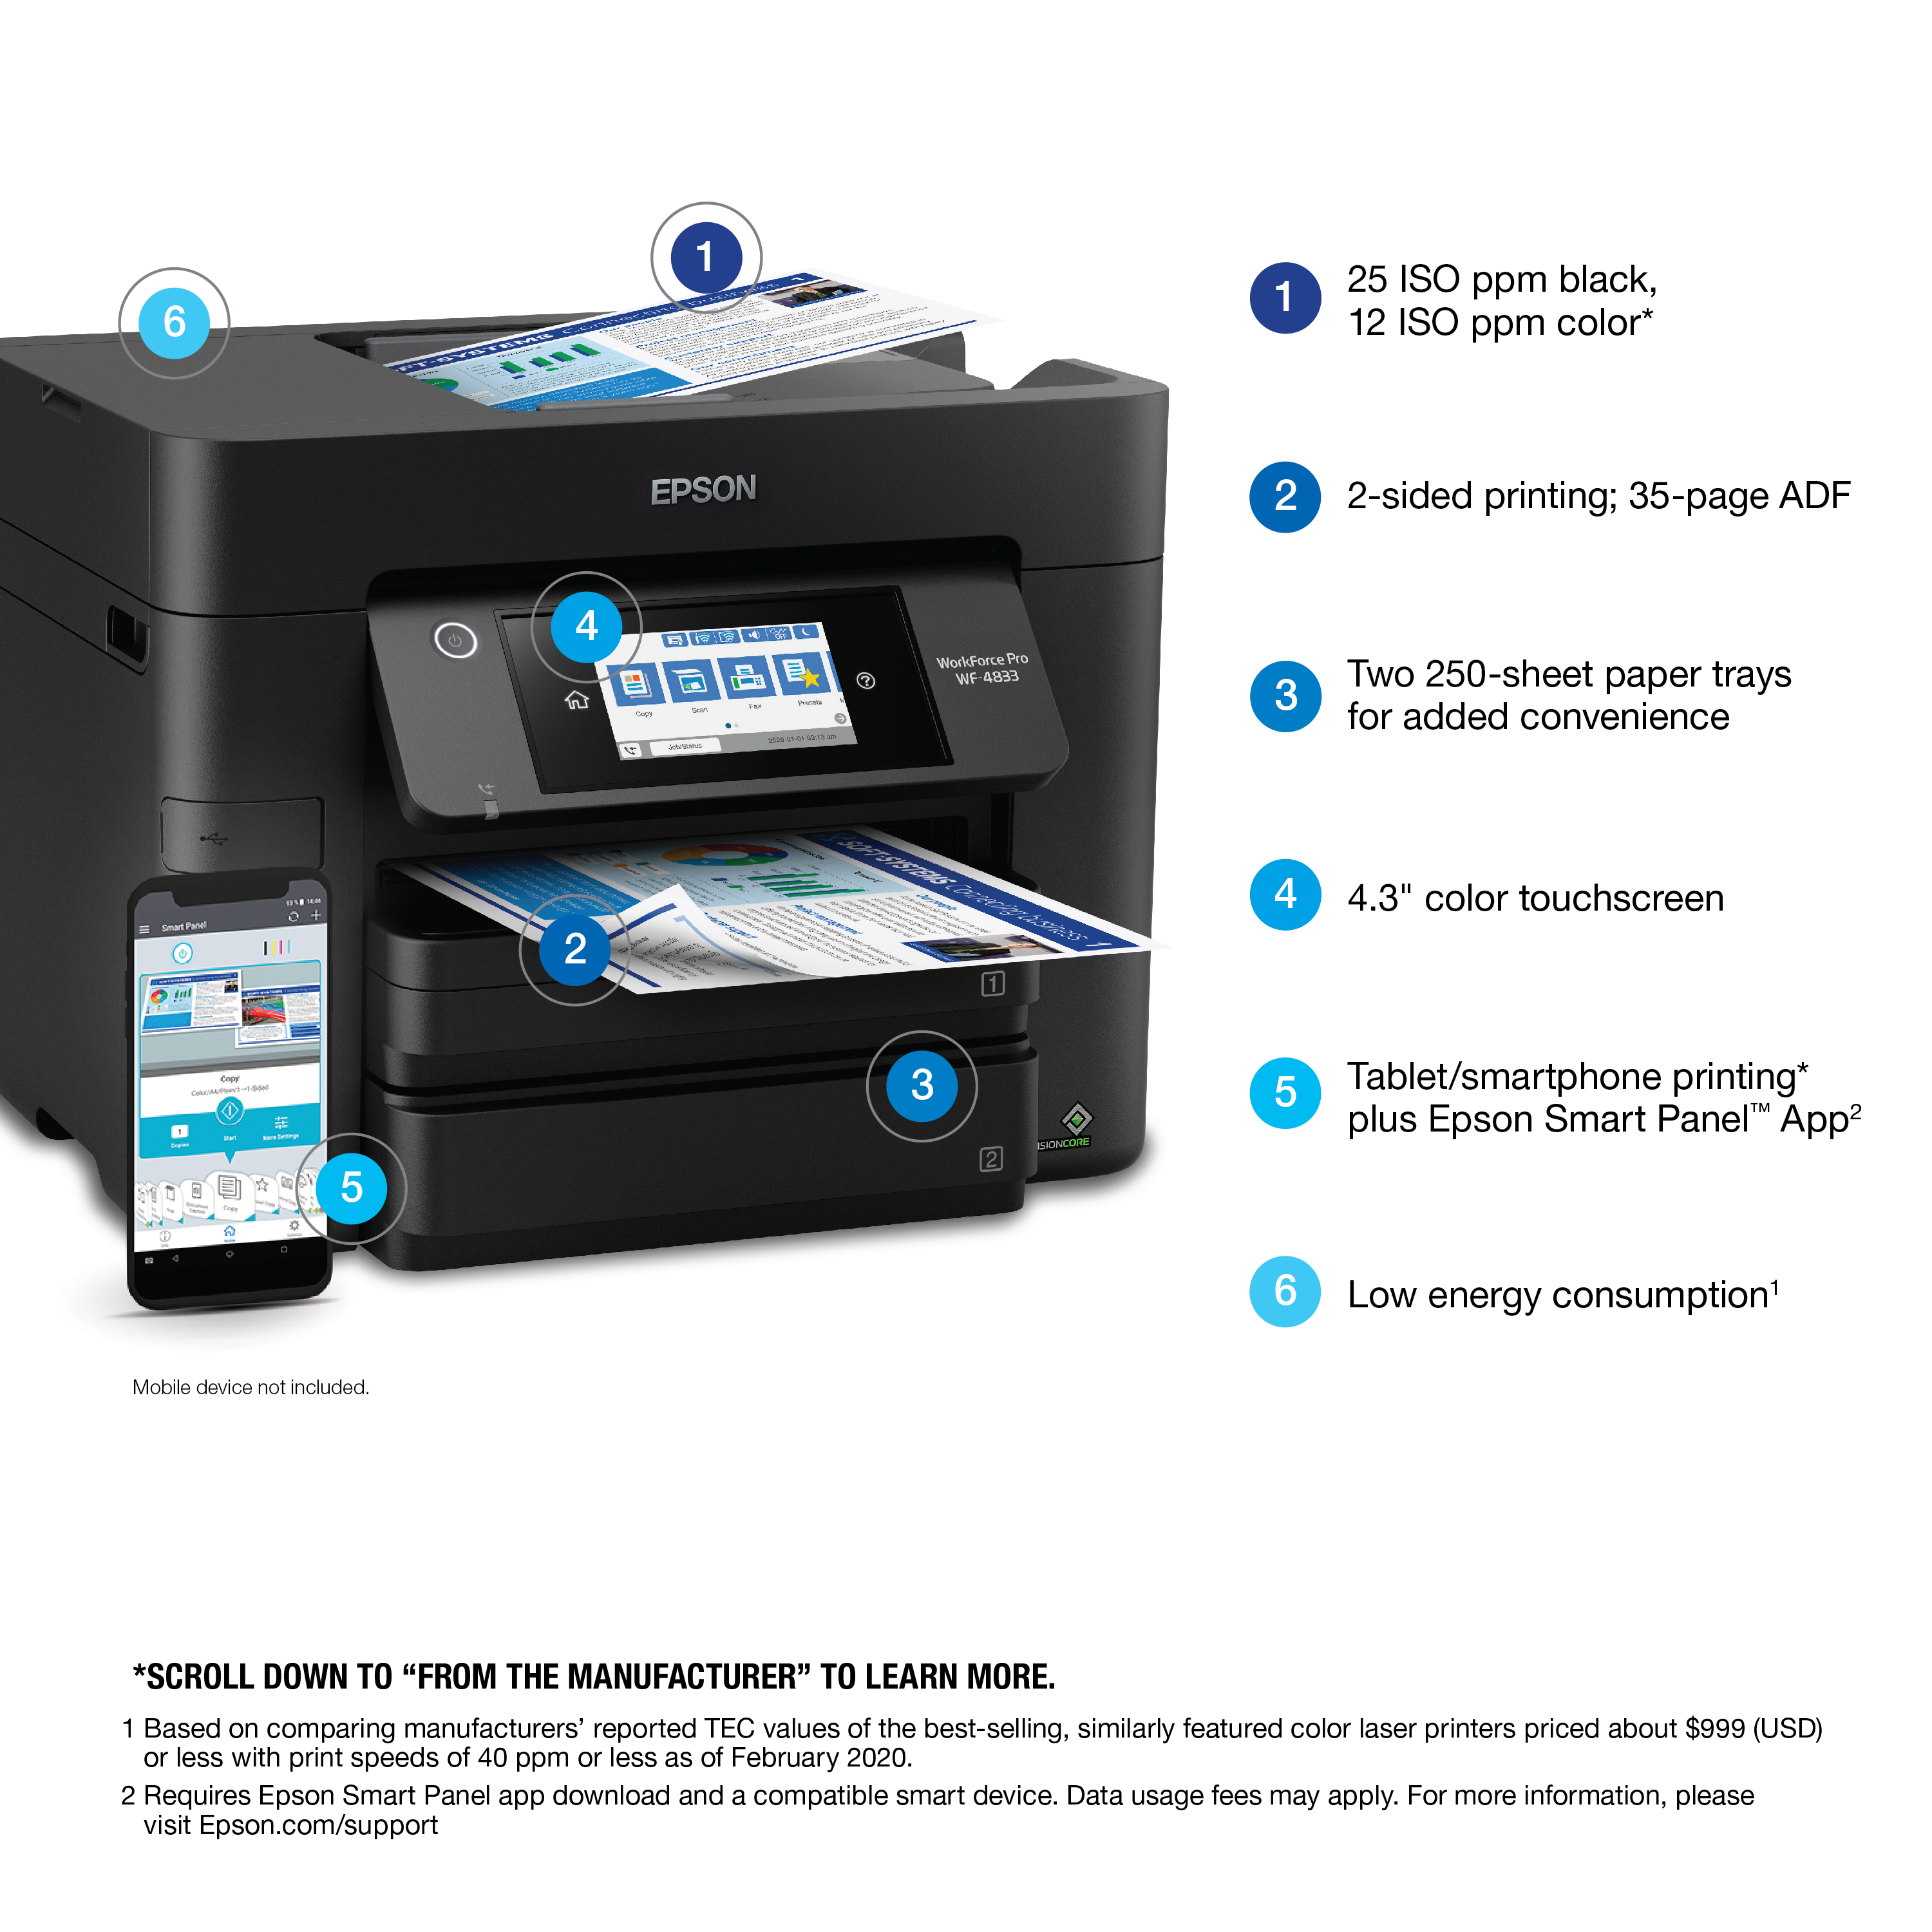 Epson WorkForce Pro WF-4833 Wireless All-in-One Printer with Auto 2-Sided Print, Copy, Scan and Fax, 50-Page ADF, 500-Sheet Paper Capacity, and 4.3" Color Touchscreen - image 4 of 5